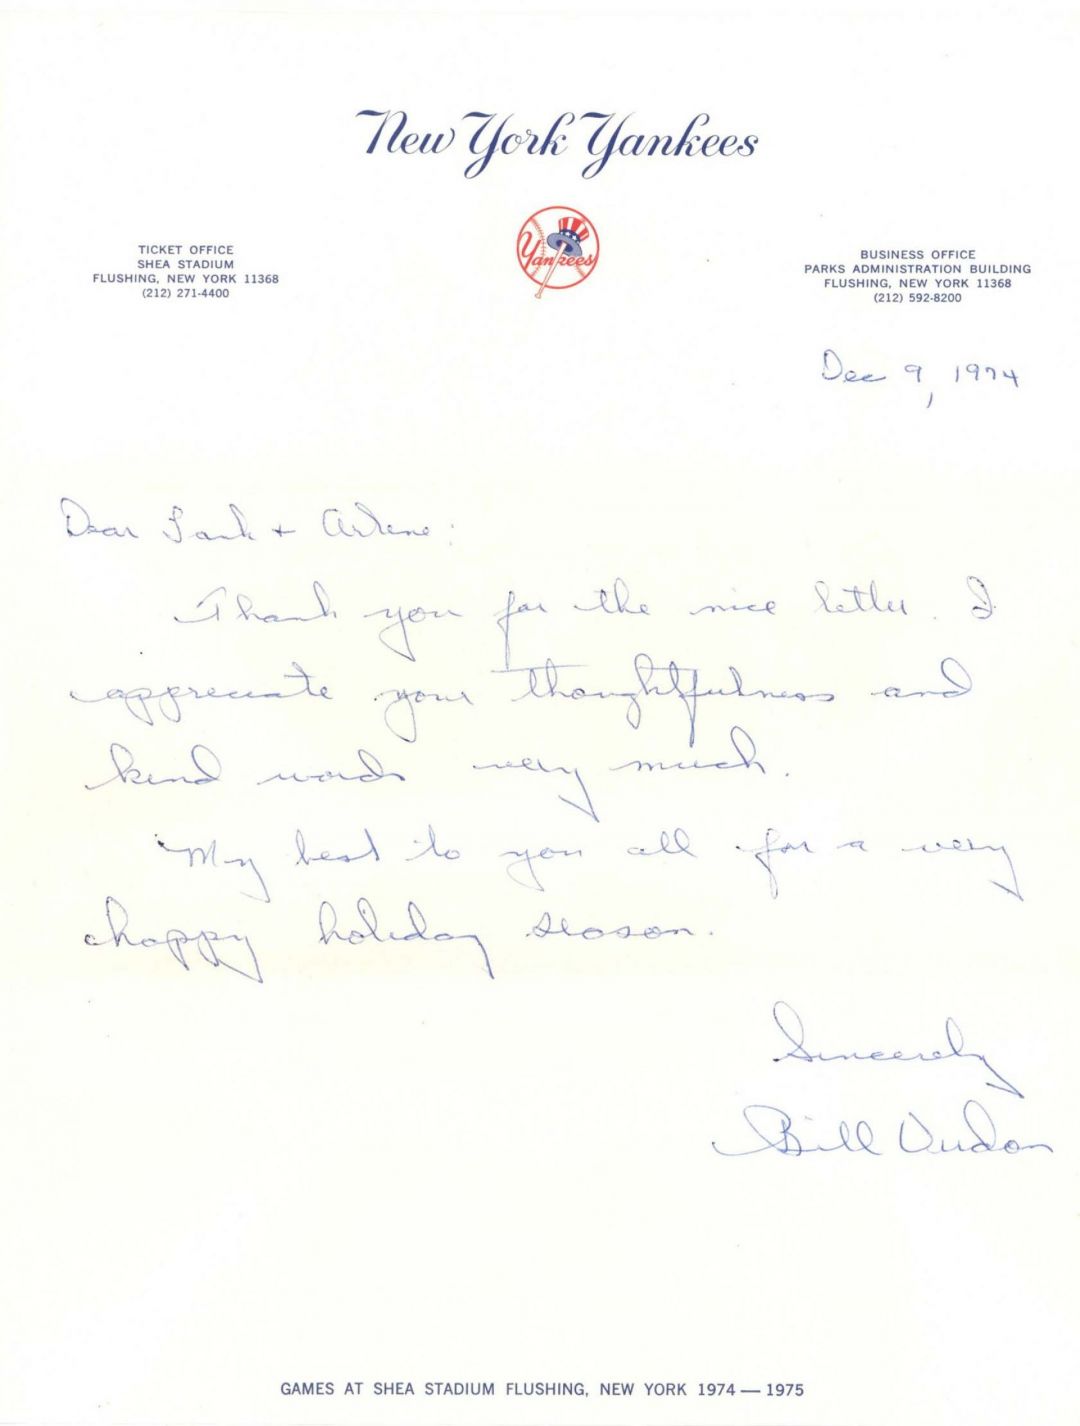 Signed Letter by Bill Virdon - Autographs